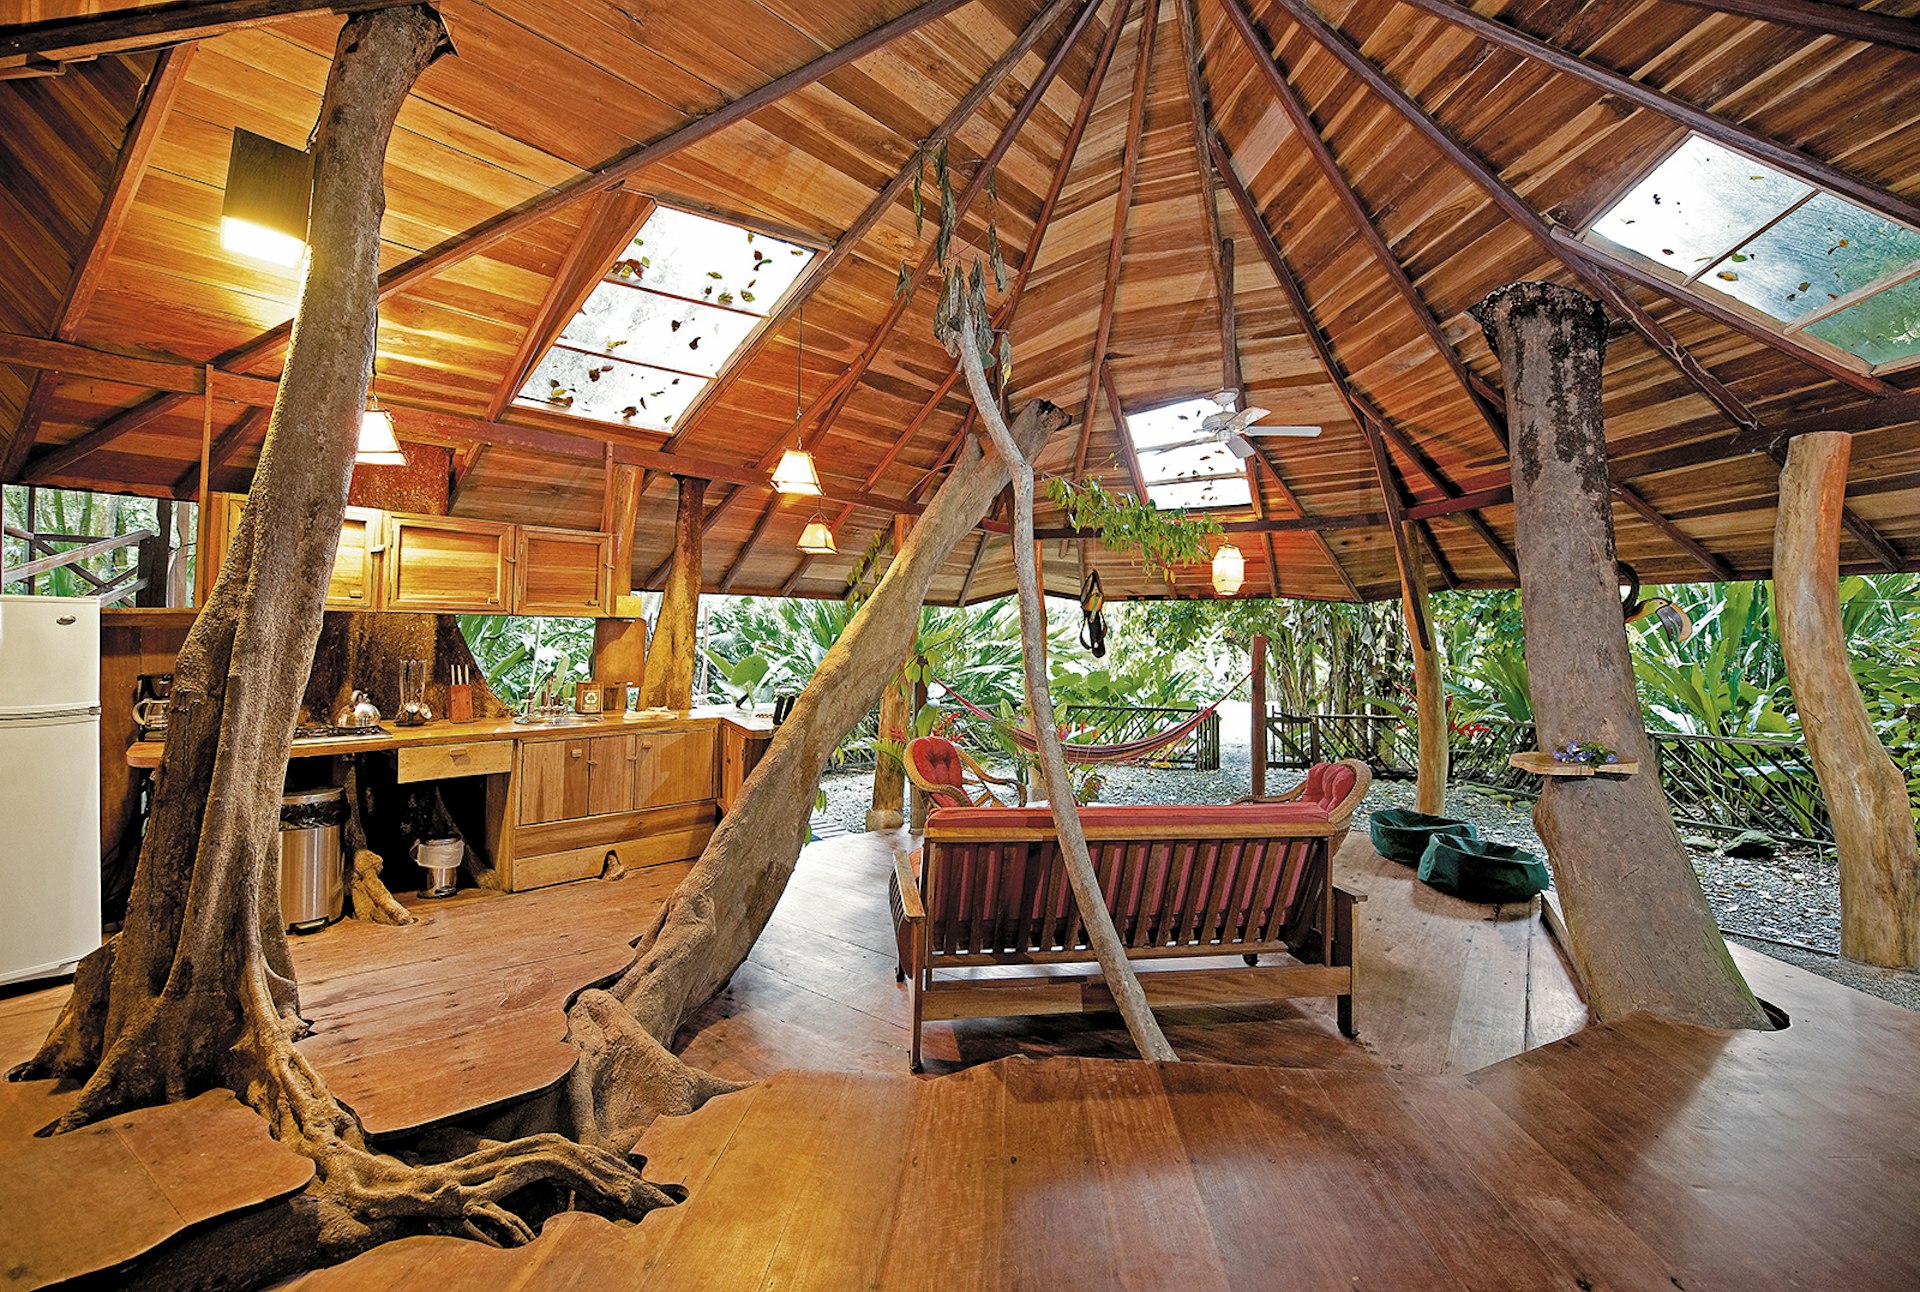 The first floor of the tree house at Tree House Lodge in Costa Rica